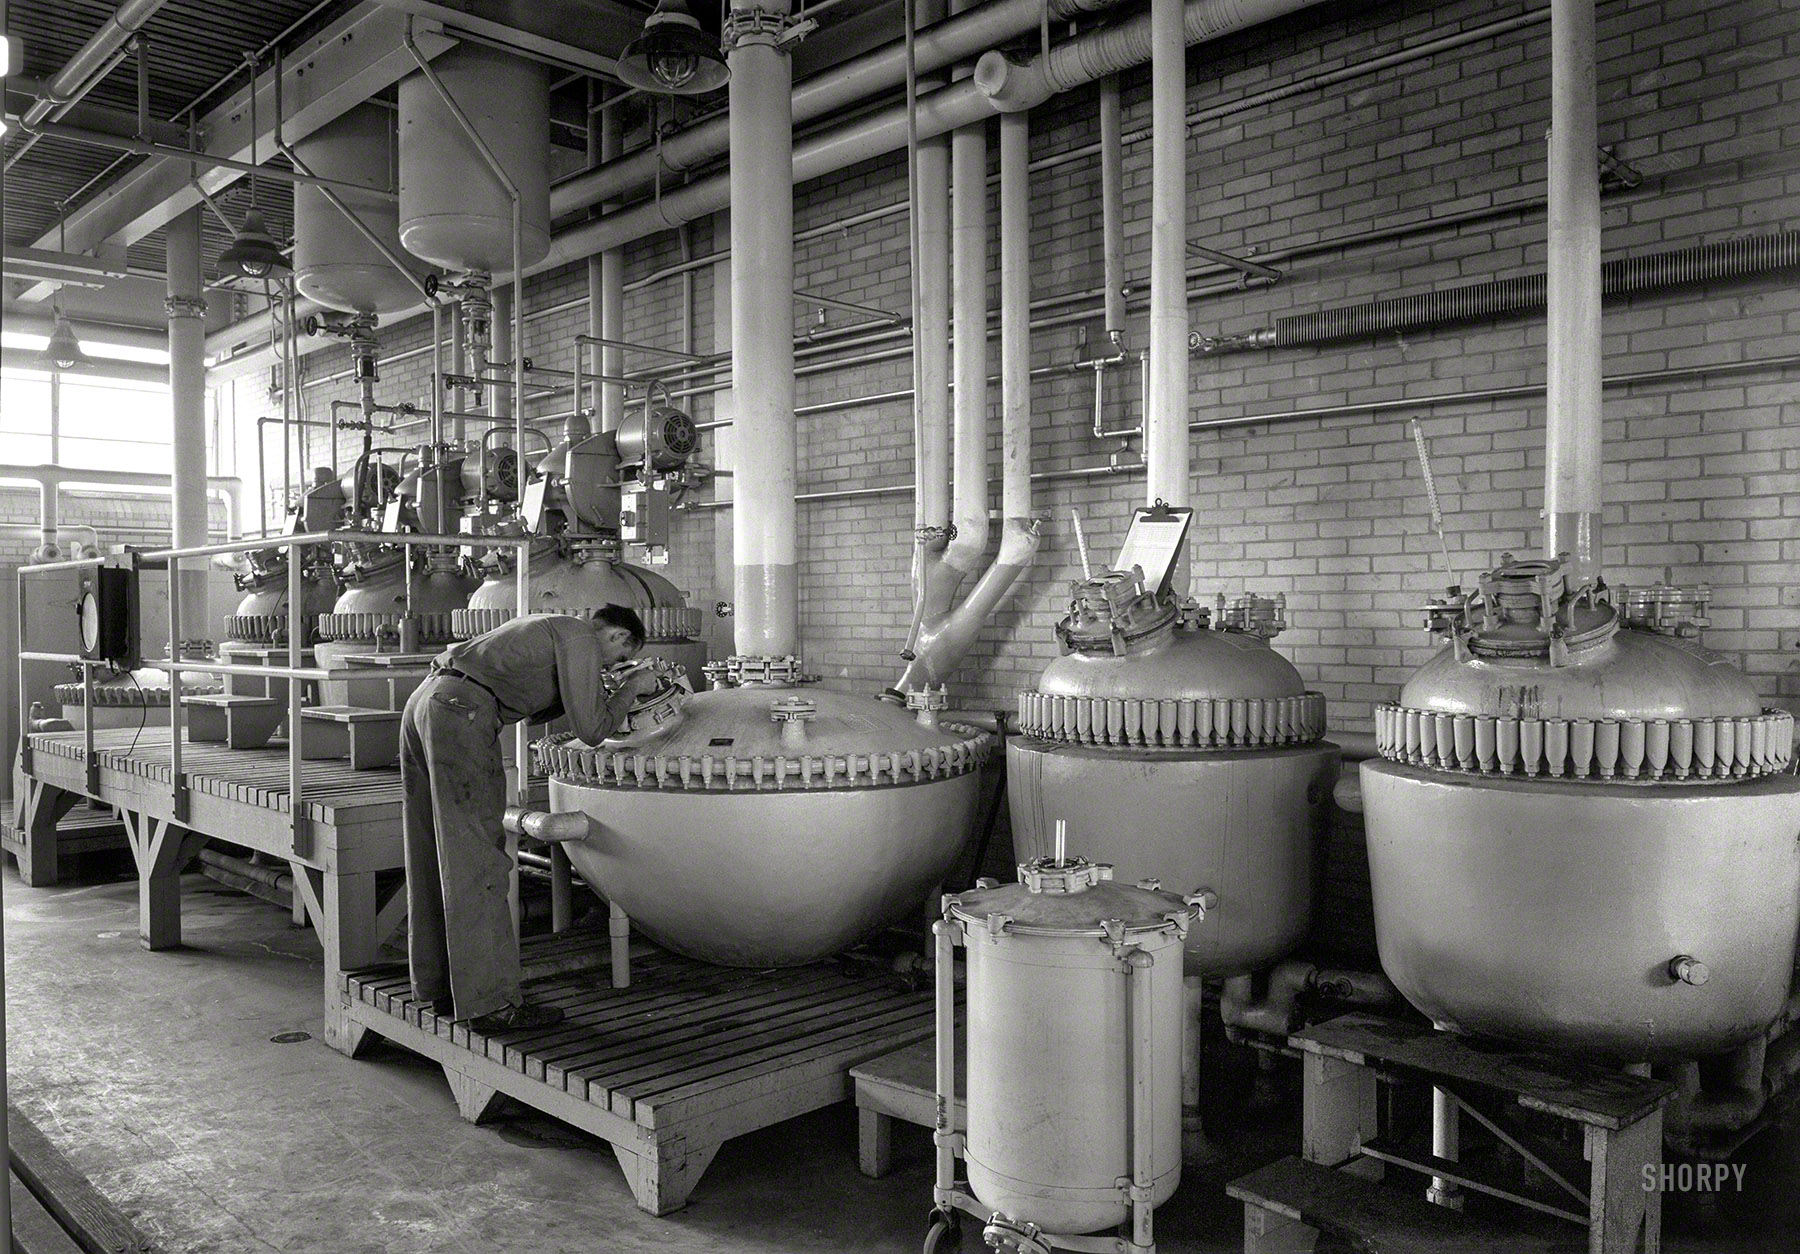 Dec. 17, 1943. "Hoffmann-LaRoche Inc., Nutley, New Jersey. Building 28. Pfaudler Co., client." Large-format negative by Gottscho-Schleisner. View full size.